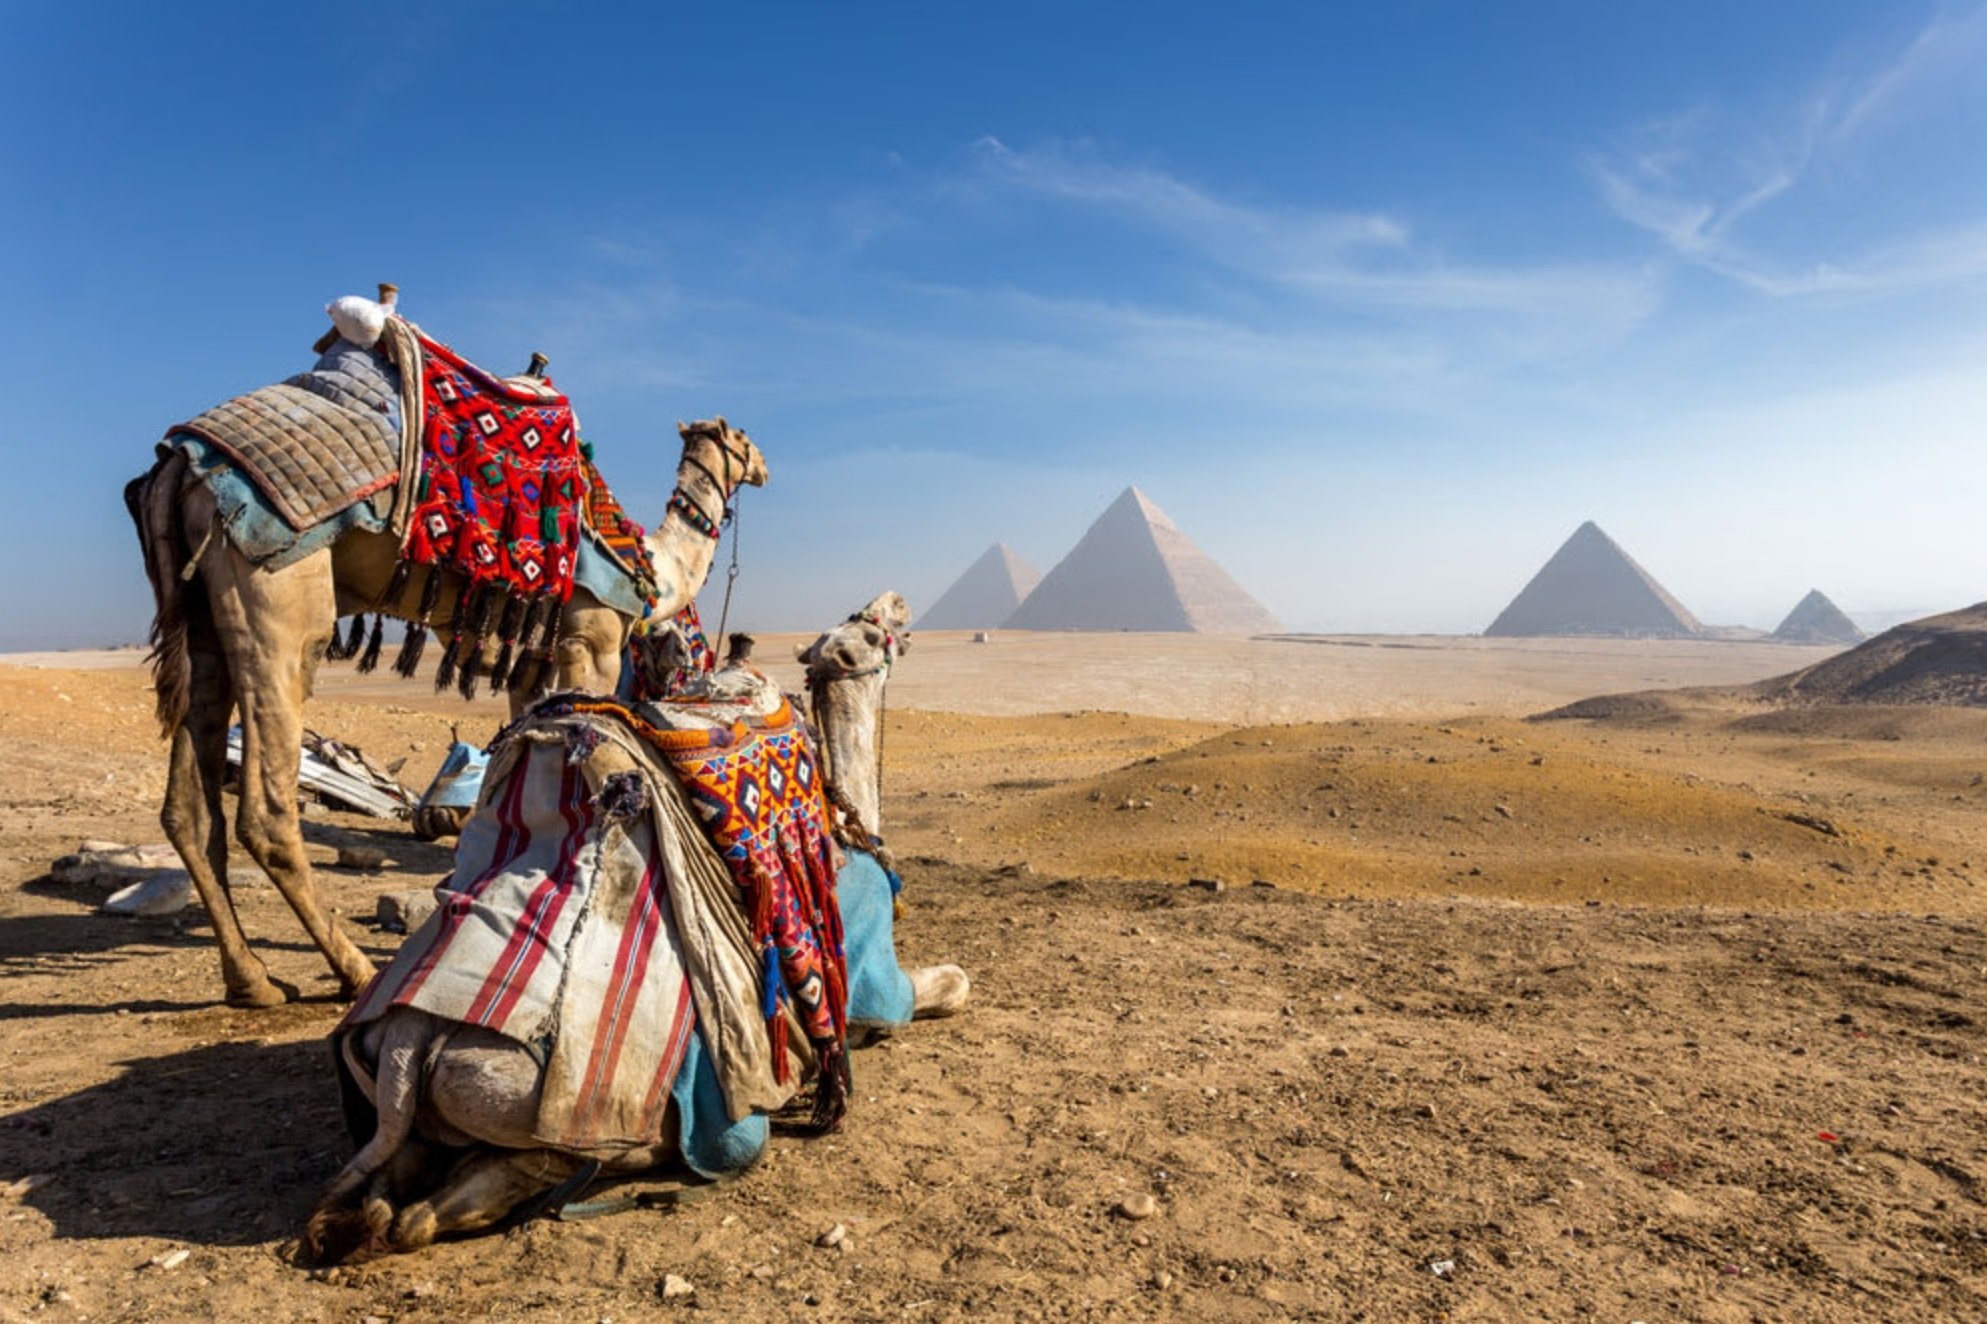 egypt holiday trips